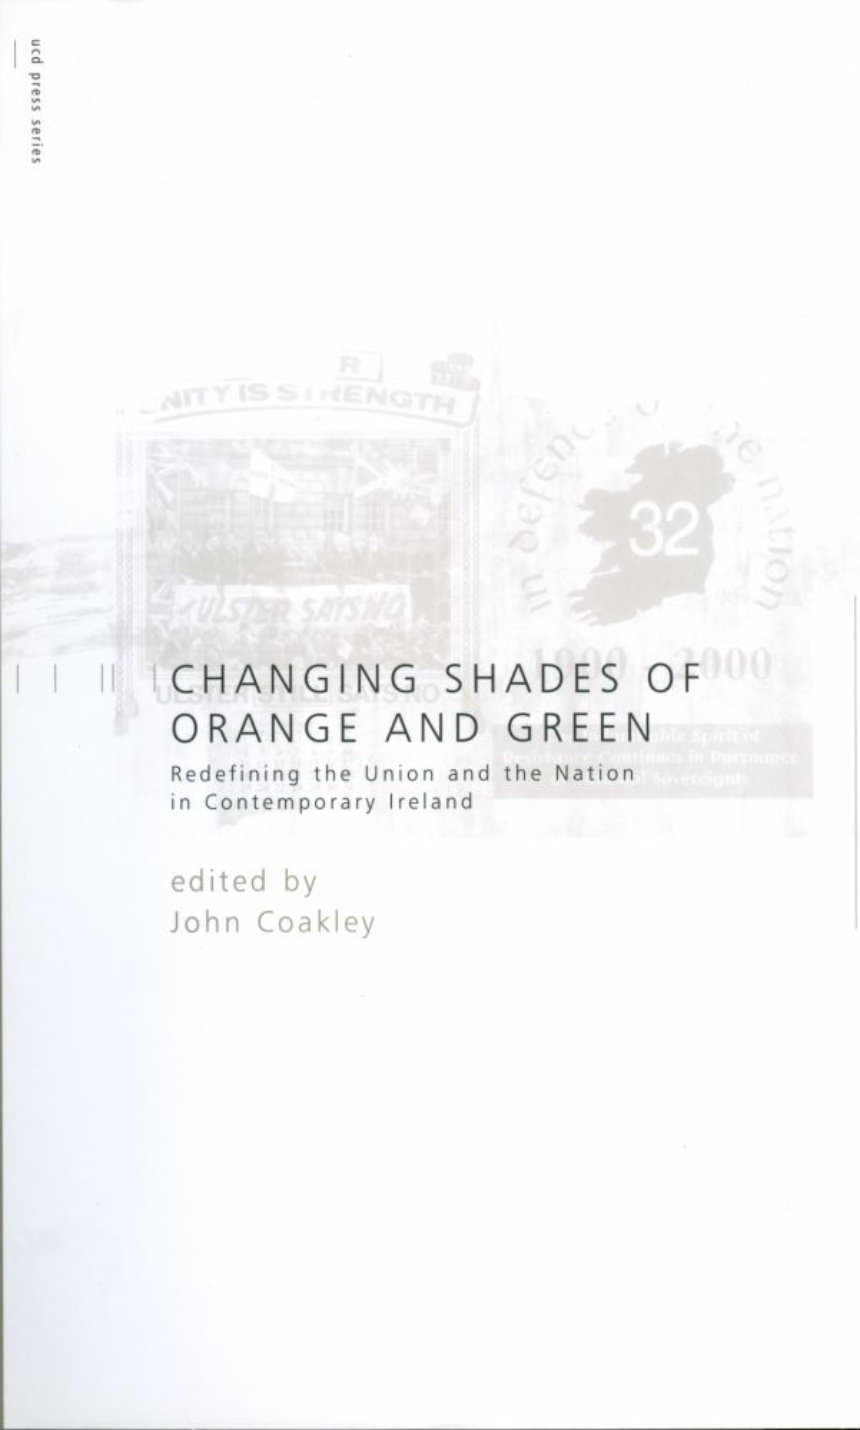 Changing Shades of Orange and Green: Redefining the Union and Nation inContemporary Ireland